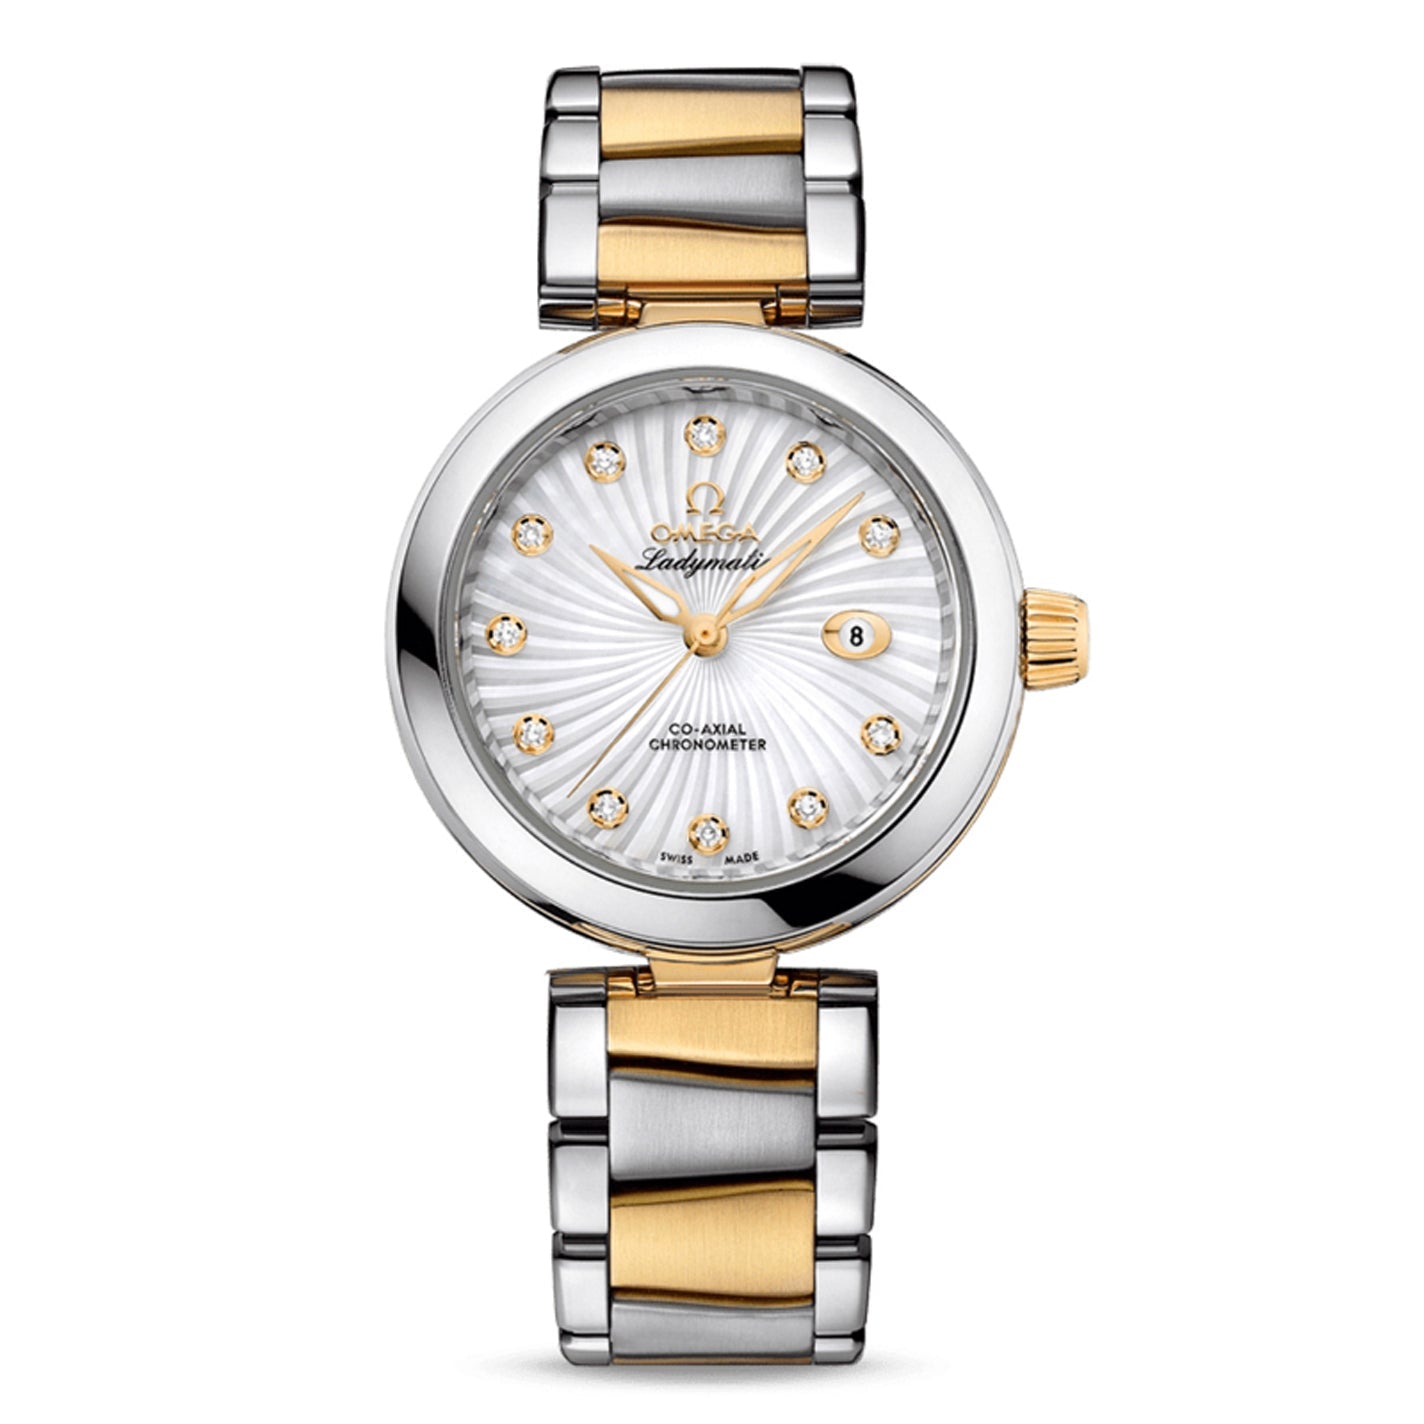 OMEGA De Ville Ladymatic Co-Axial Chronometer 34mm Watch